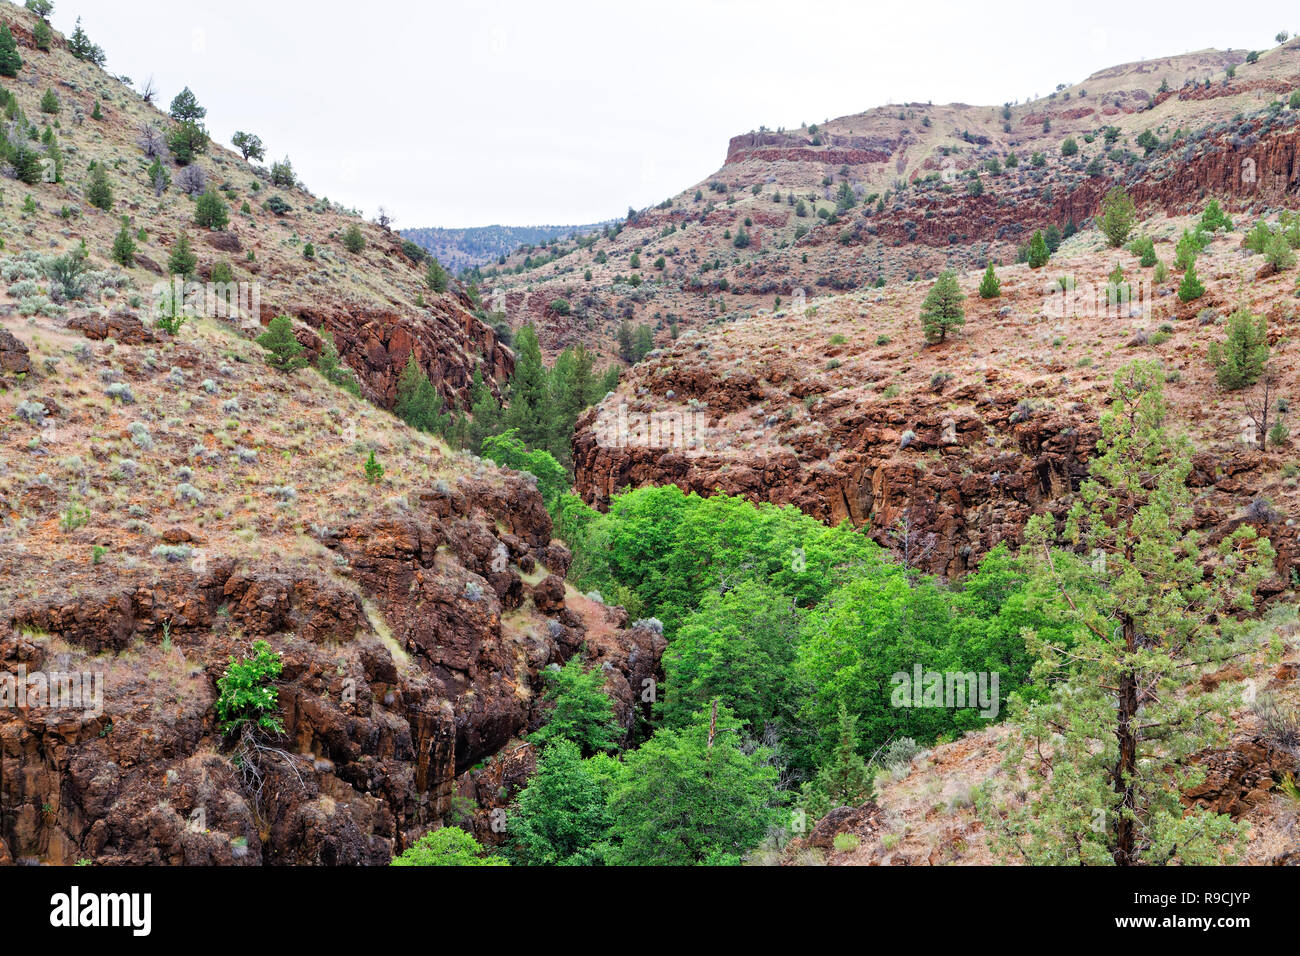 42,893.03504 Deep creek cut canyon gorge and cliffs in open steep & winding sagebrush hills, ridges & bluffs in the high desert of central Oregon, USA Stock Photo